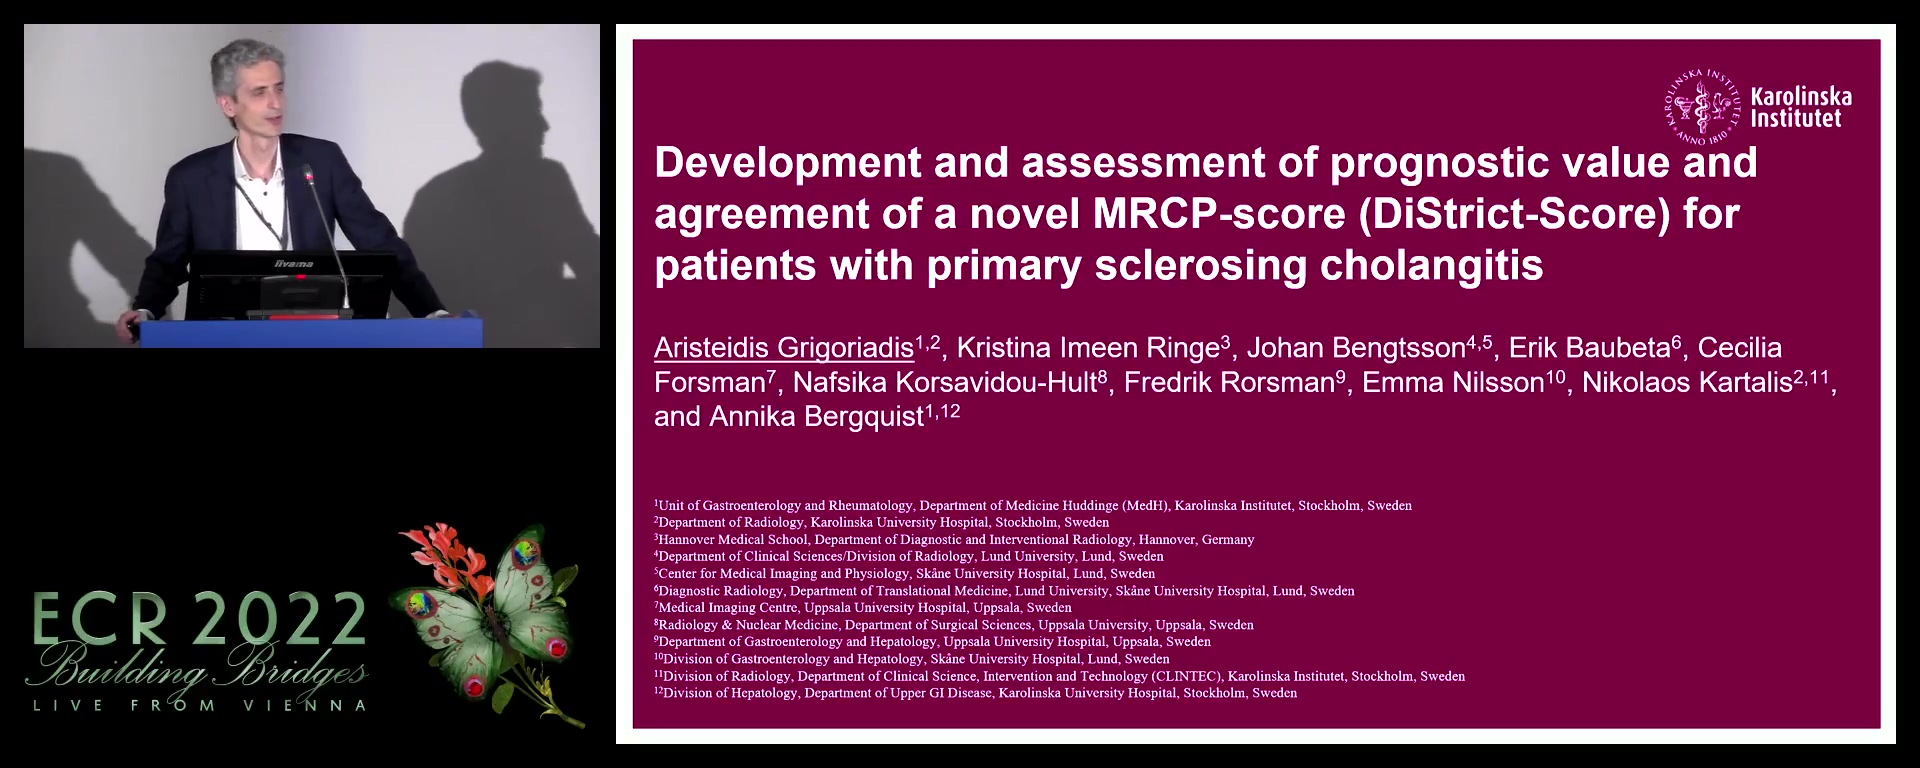 Development and assessment of prognostic value and agreement of a novel MRCP-score for patients with primary sclerosing cholangitis - Aristeidis Grigoriadis, Stockholm / SE